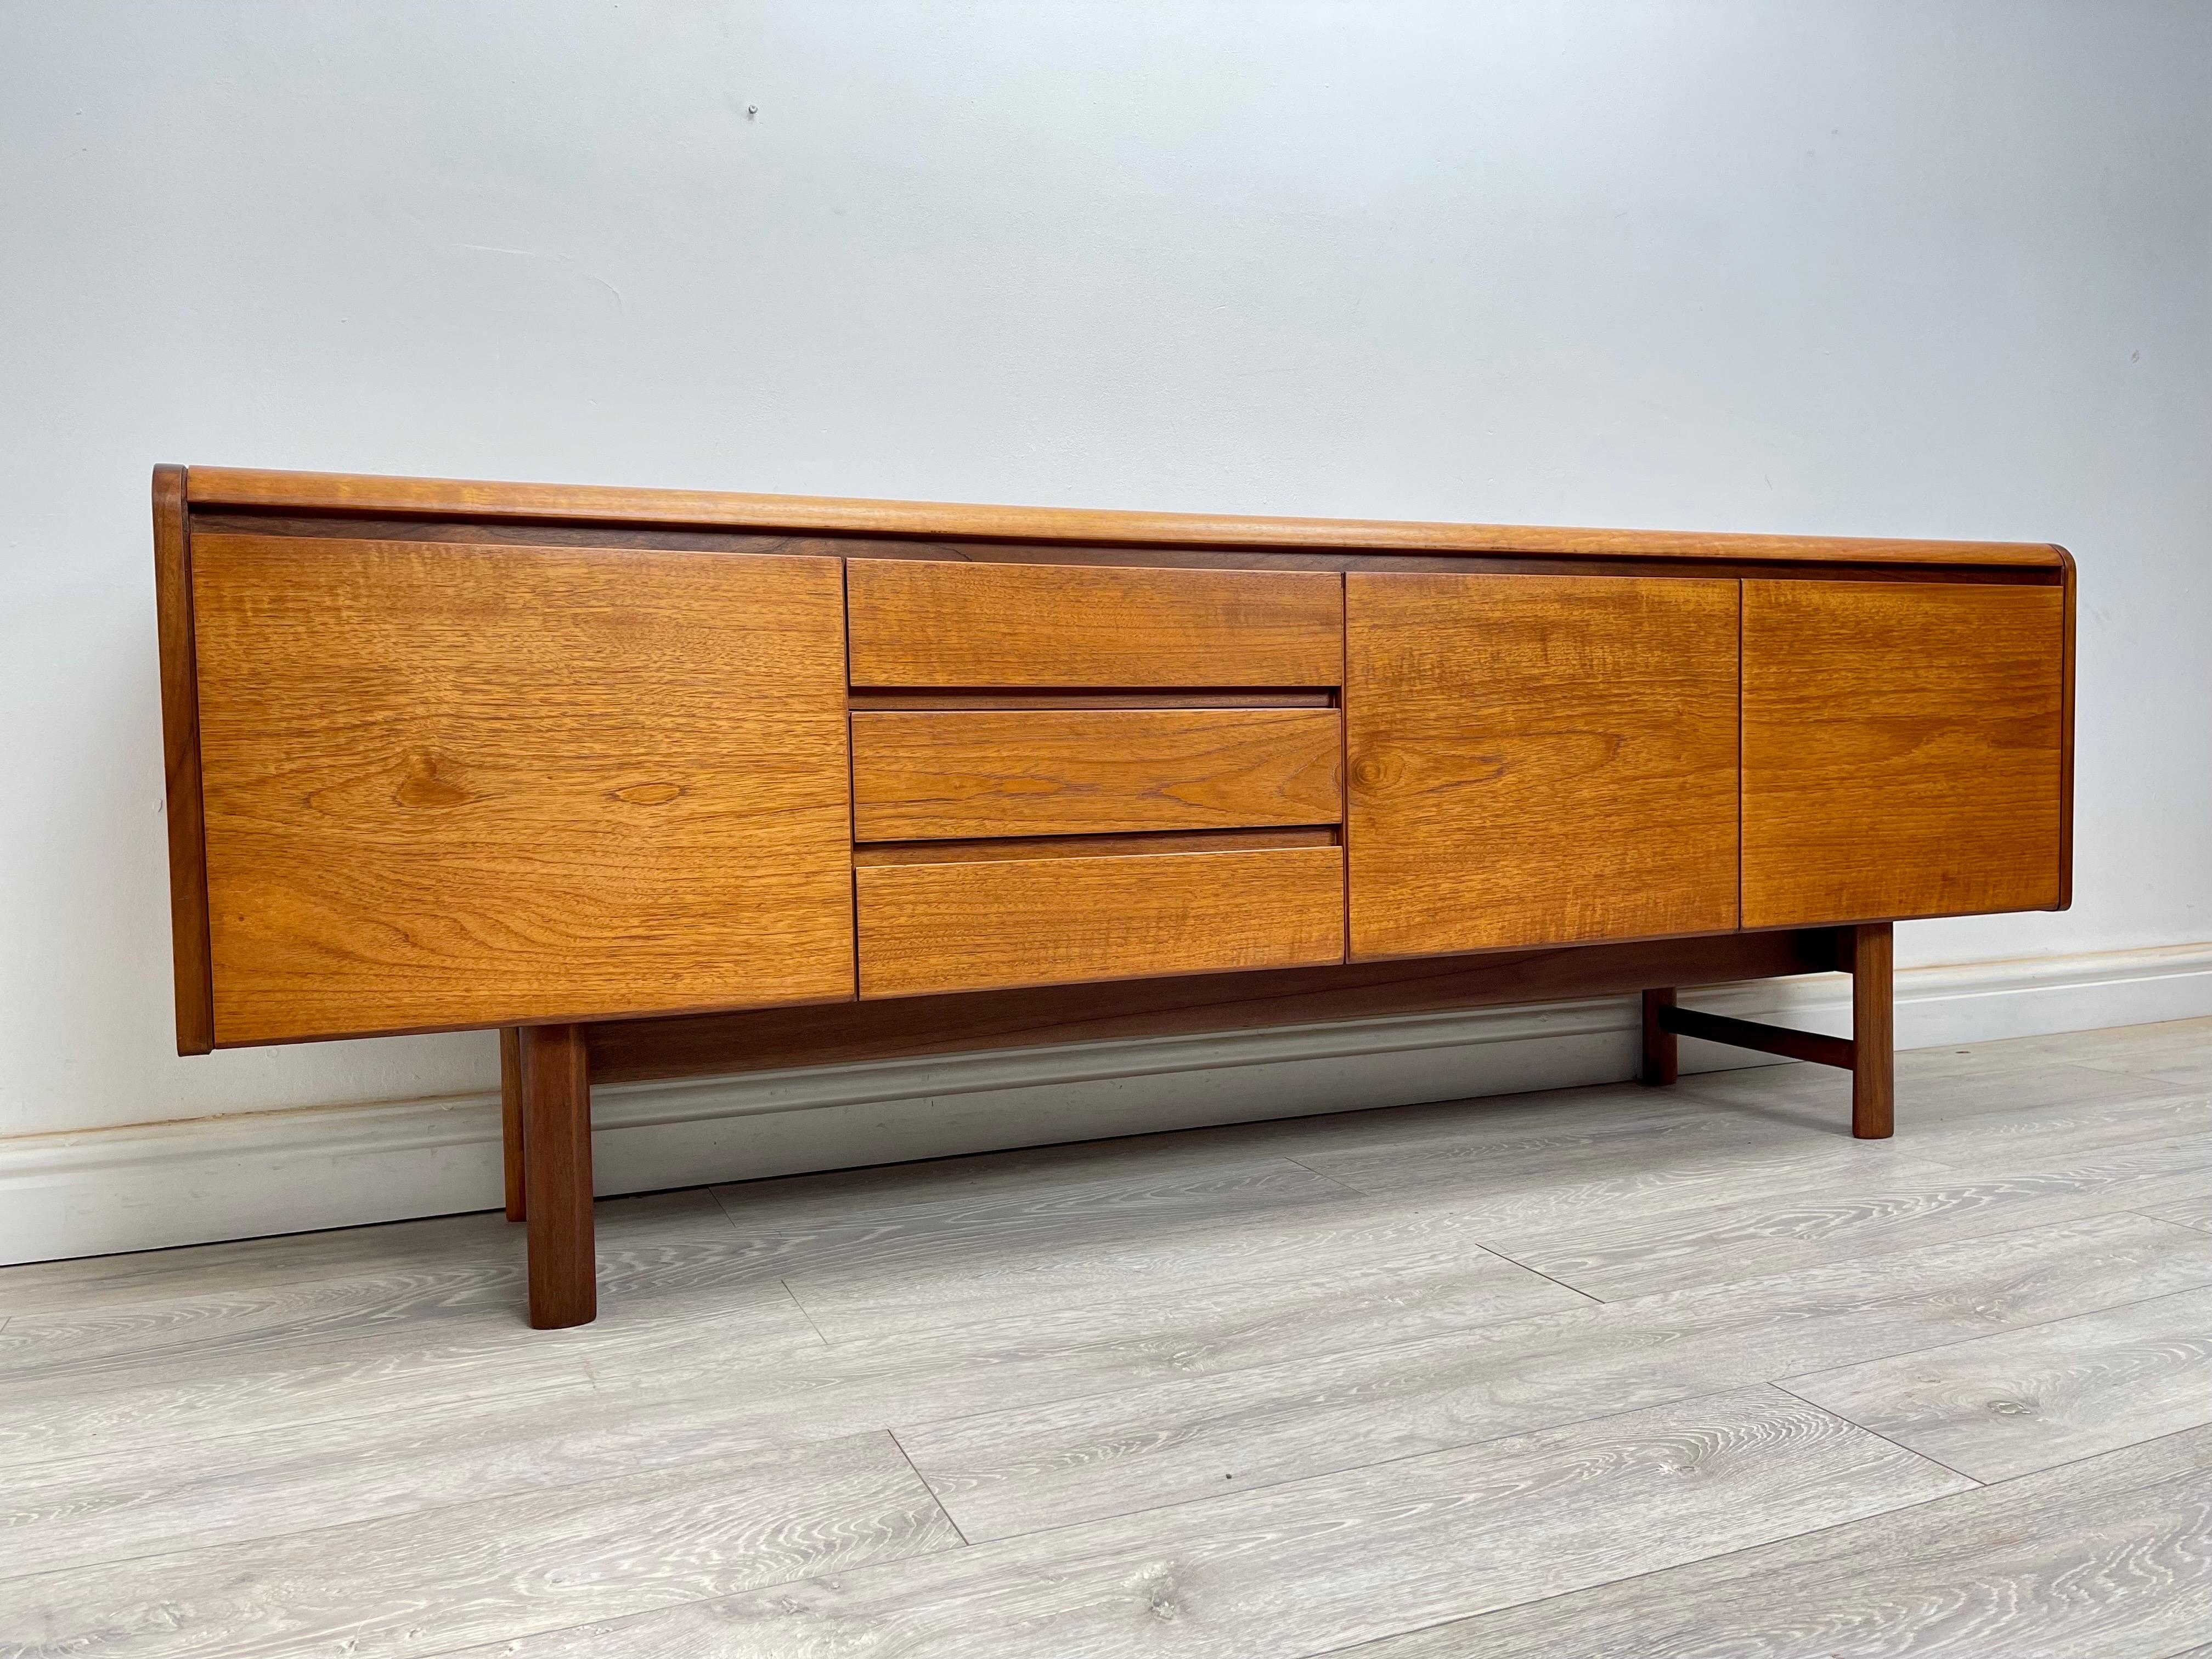 SIDEBOARD 
midcentury teak sideboard made by White and Newton circa 1960s. The sideboard has stunning grain throughout, great quality piece with Minimalist design and plenty of storage. The sideboard has a double cupboard with a fixed shelf, bank of